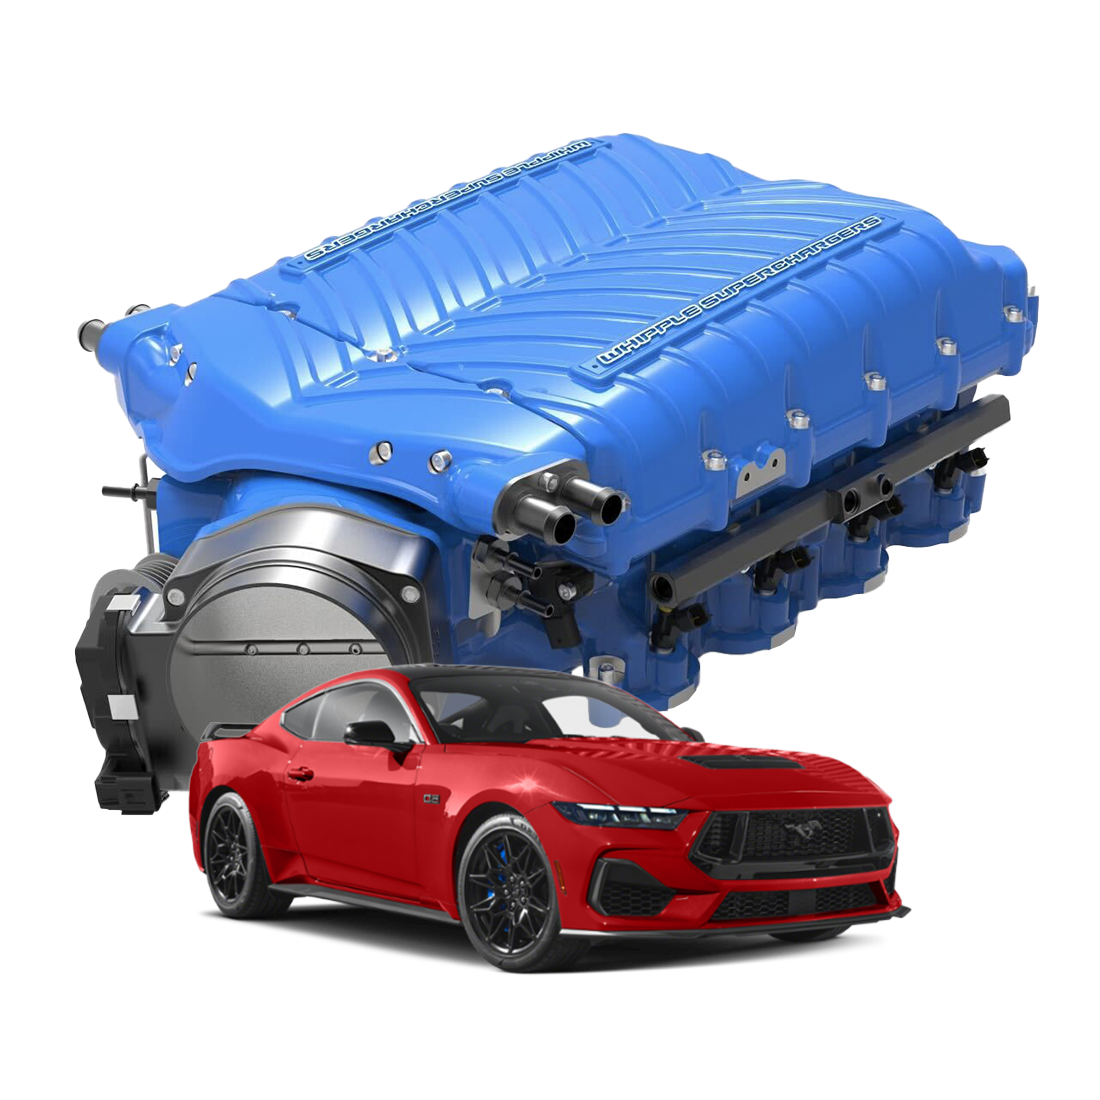 S650 Mustang WHIPPLE SUPERCHARGERS Black Friday Sale @ Lethal Performance - EXTRAS INCLUDED! Plus Supercharger Refunds 2024mustangwhipple